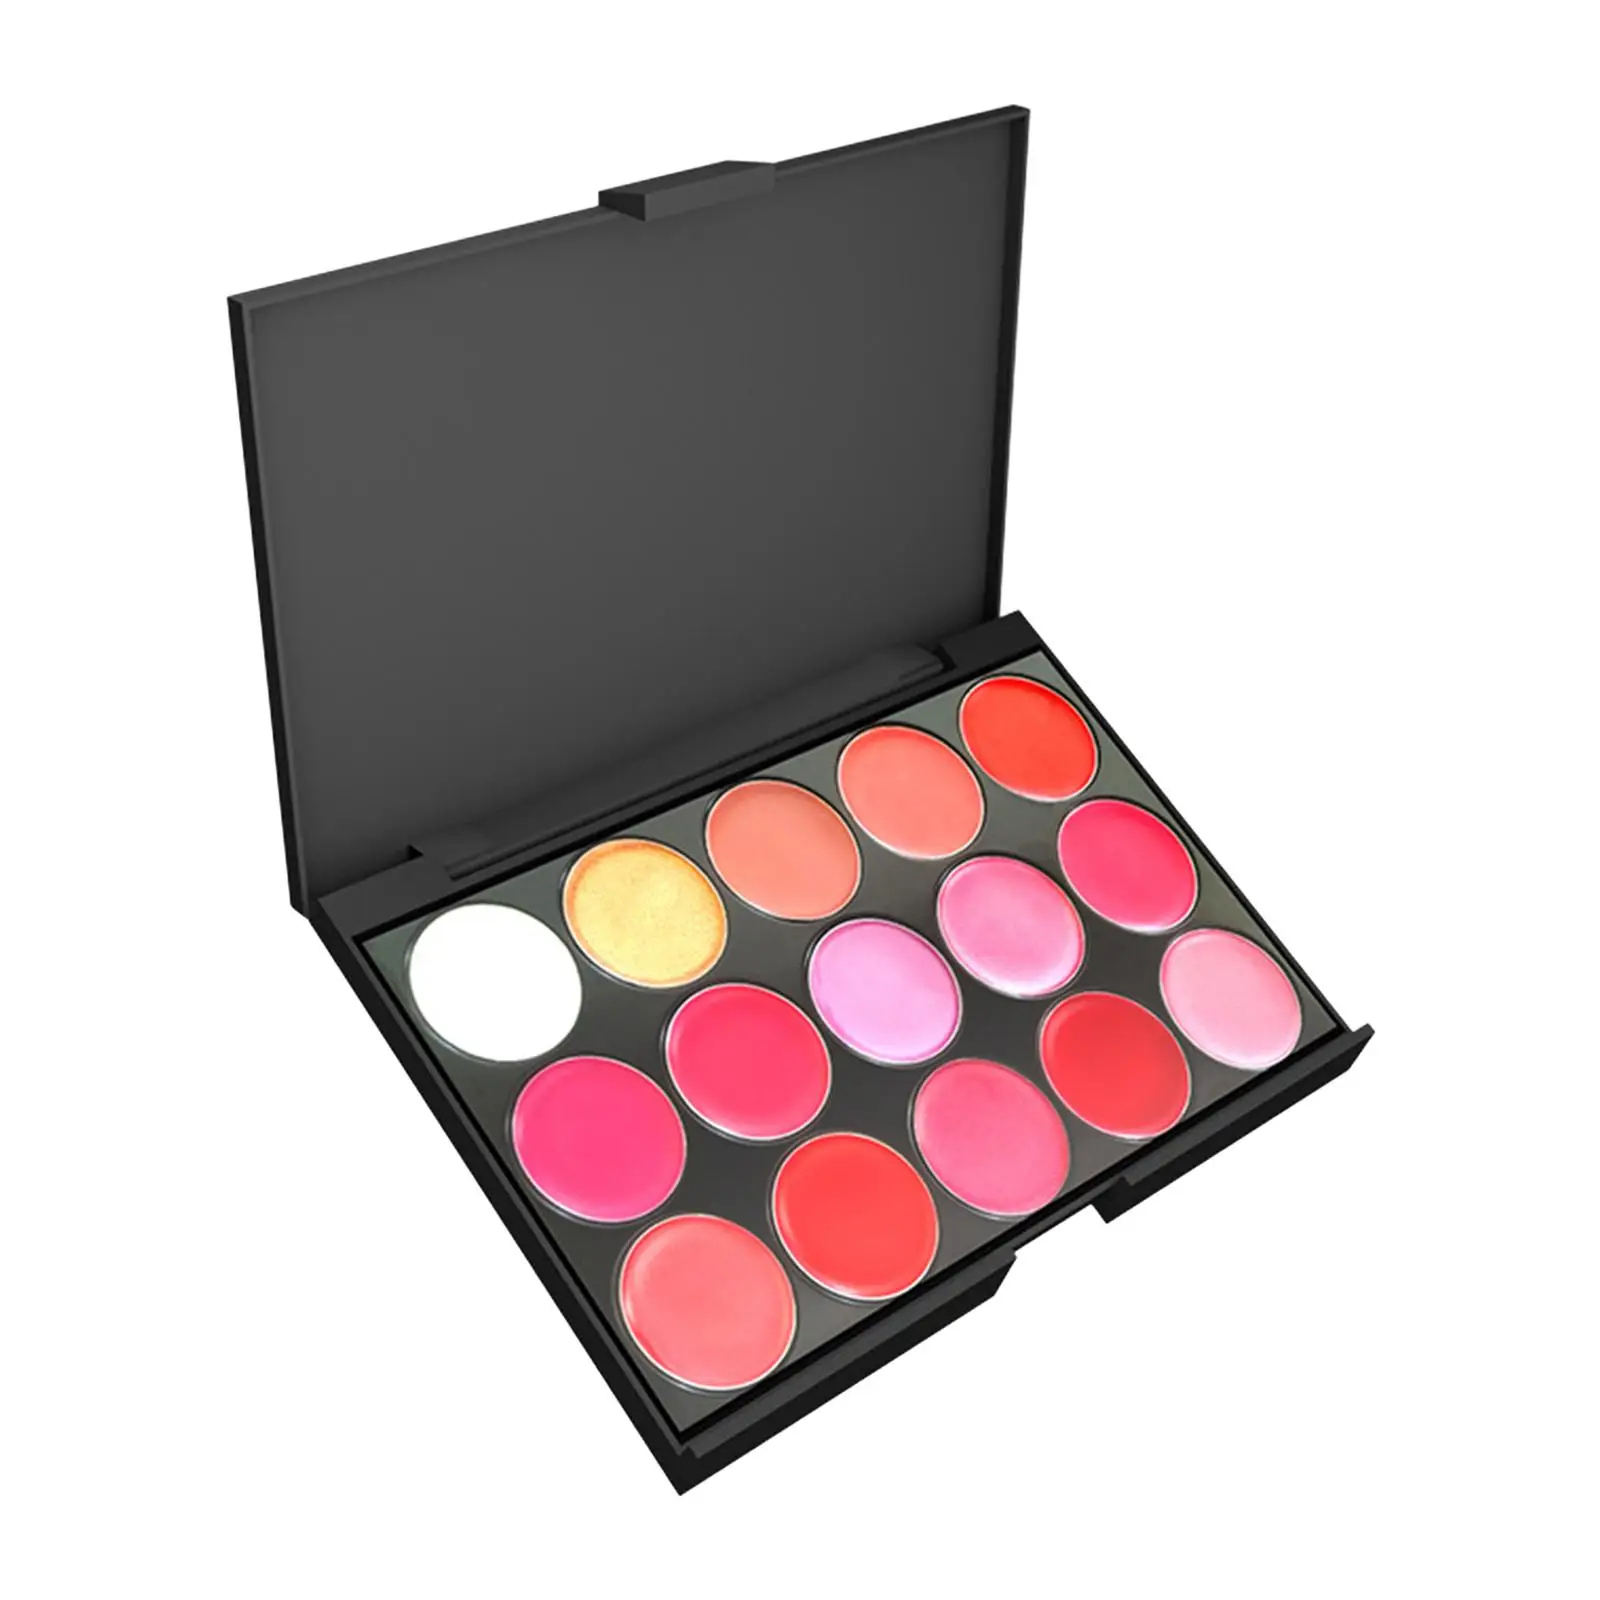 15 Colors Eyeshadow Palette Smooth Delicate Makeup Palettes for Wedding Women